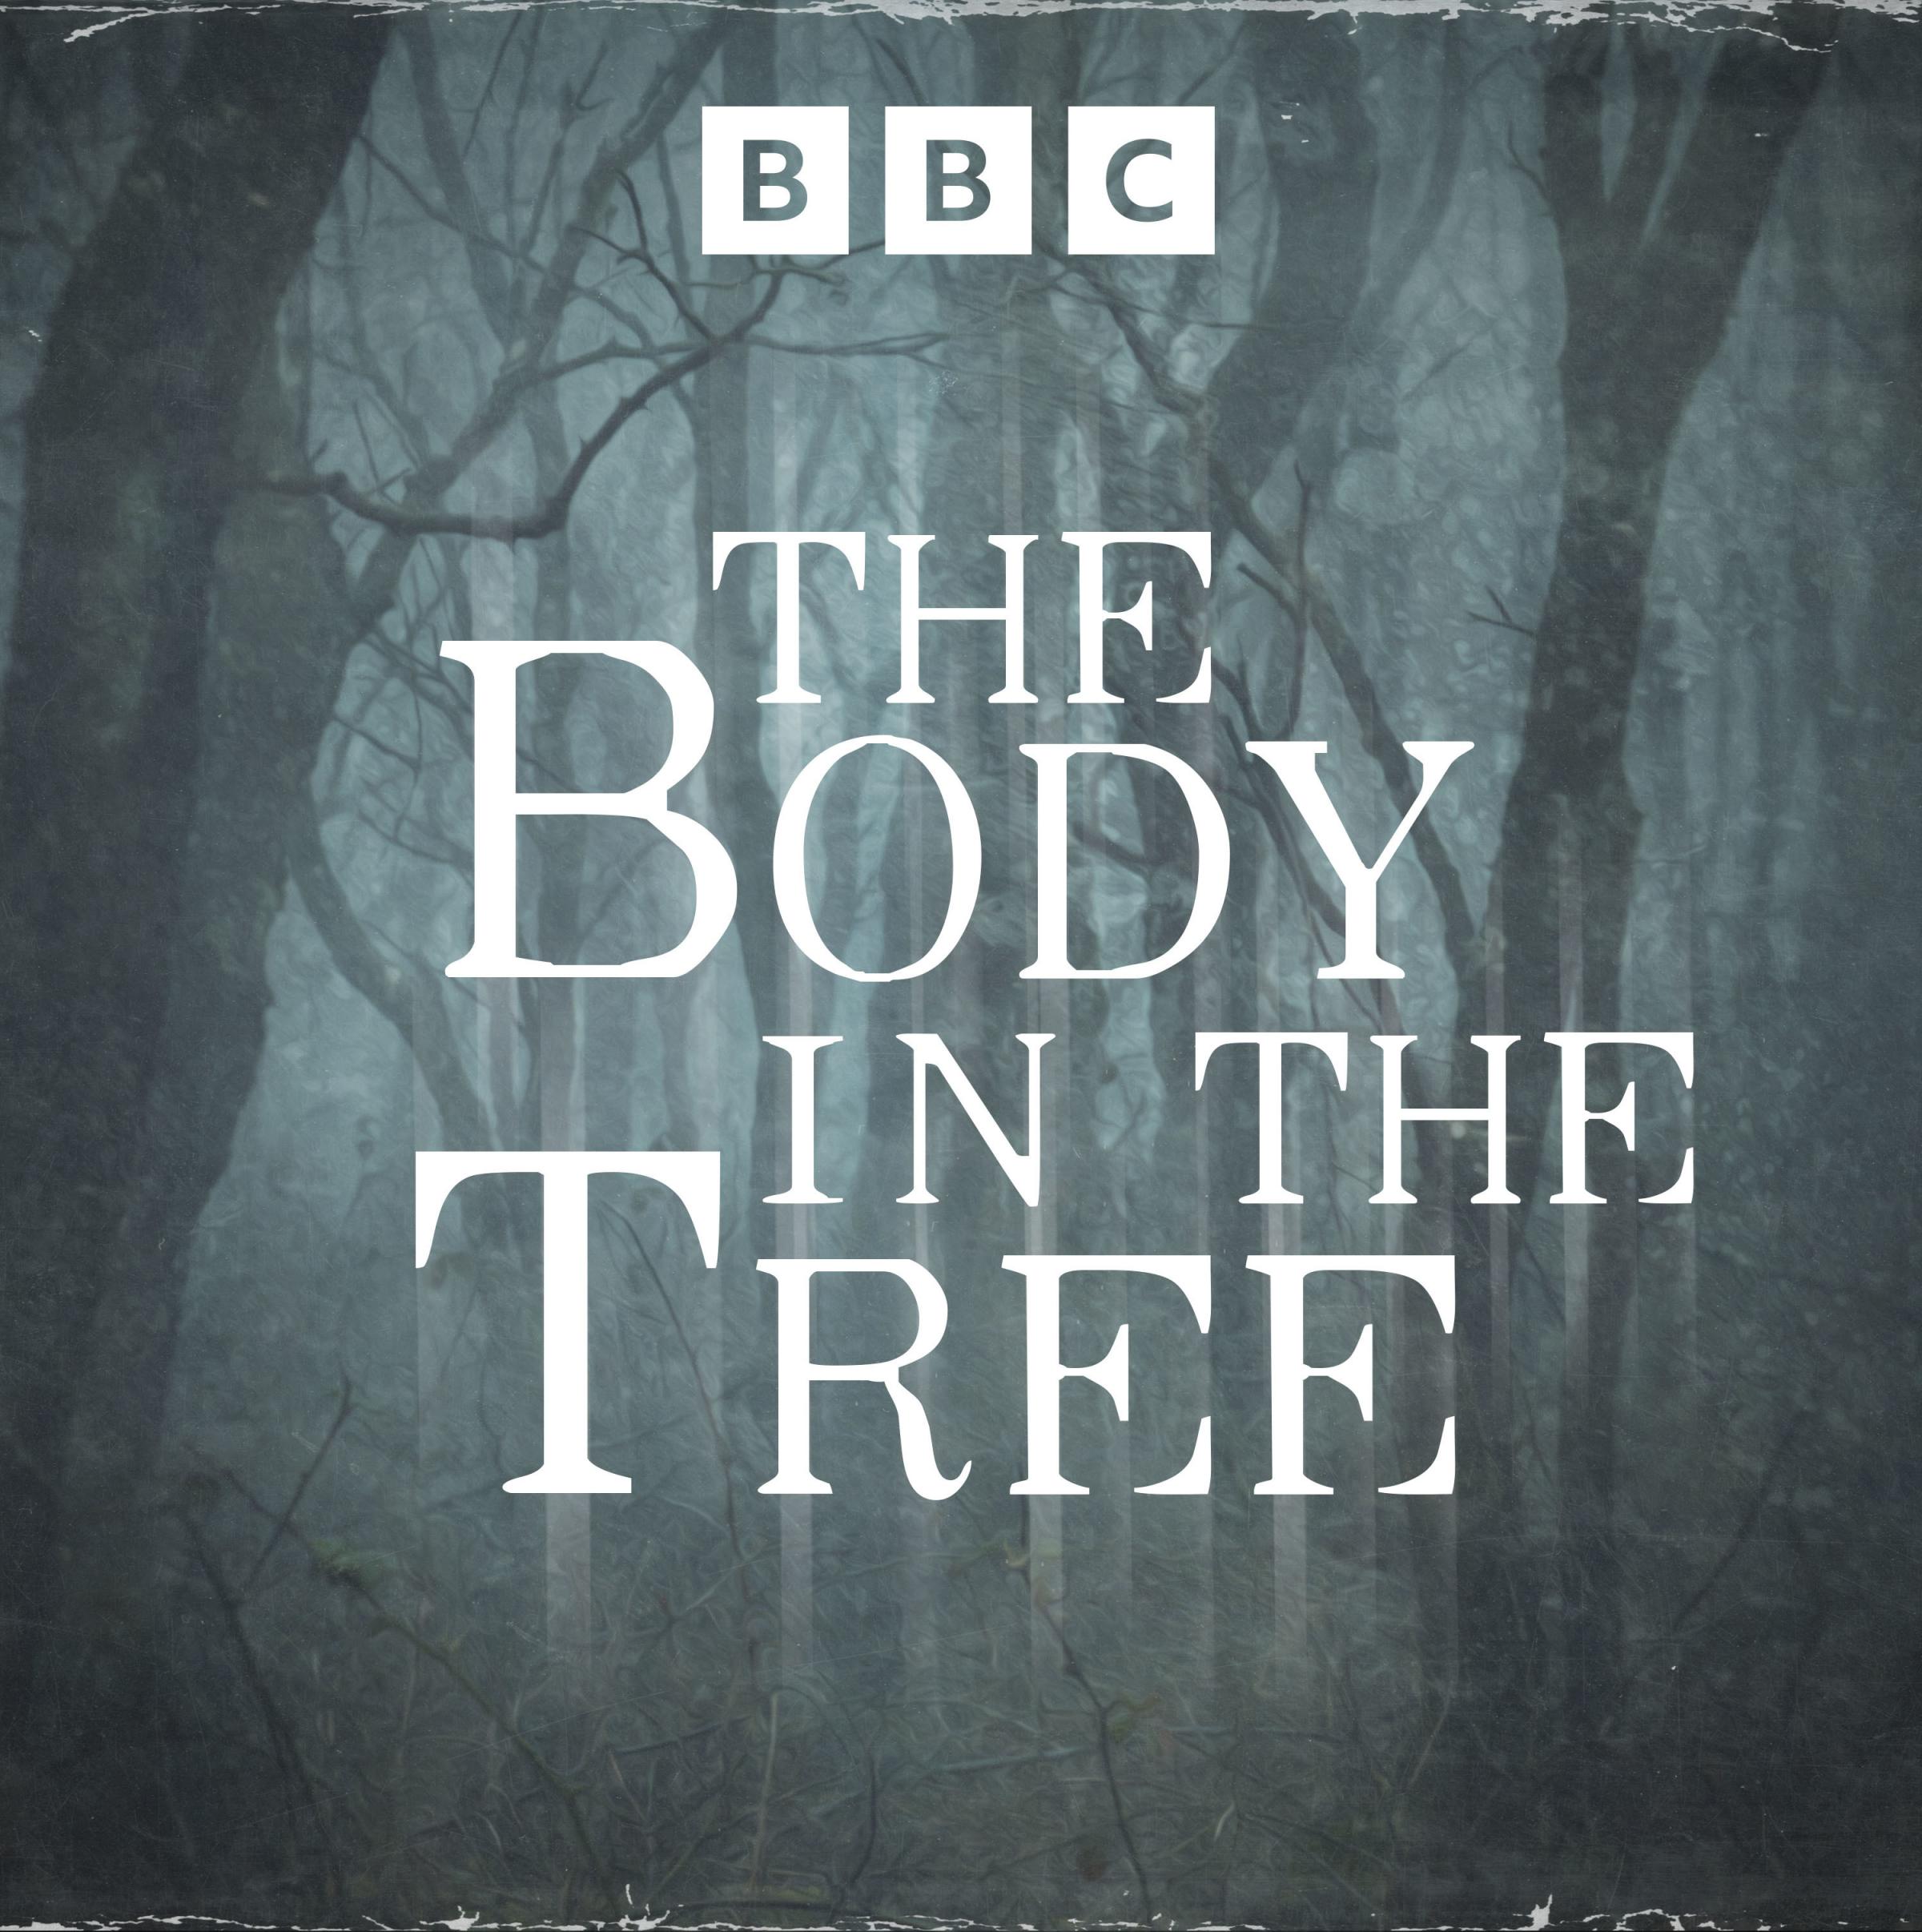 BBC Hereford & Worcesters Nicola Goodwin seeks to uncover the truth of a mysterious death